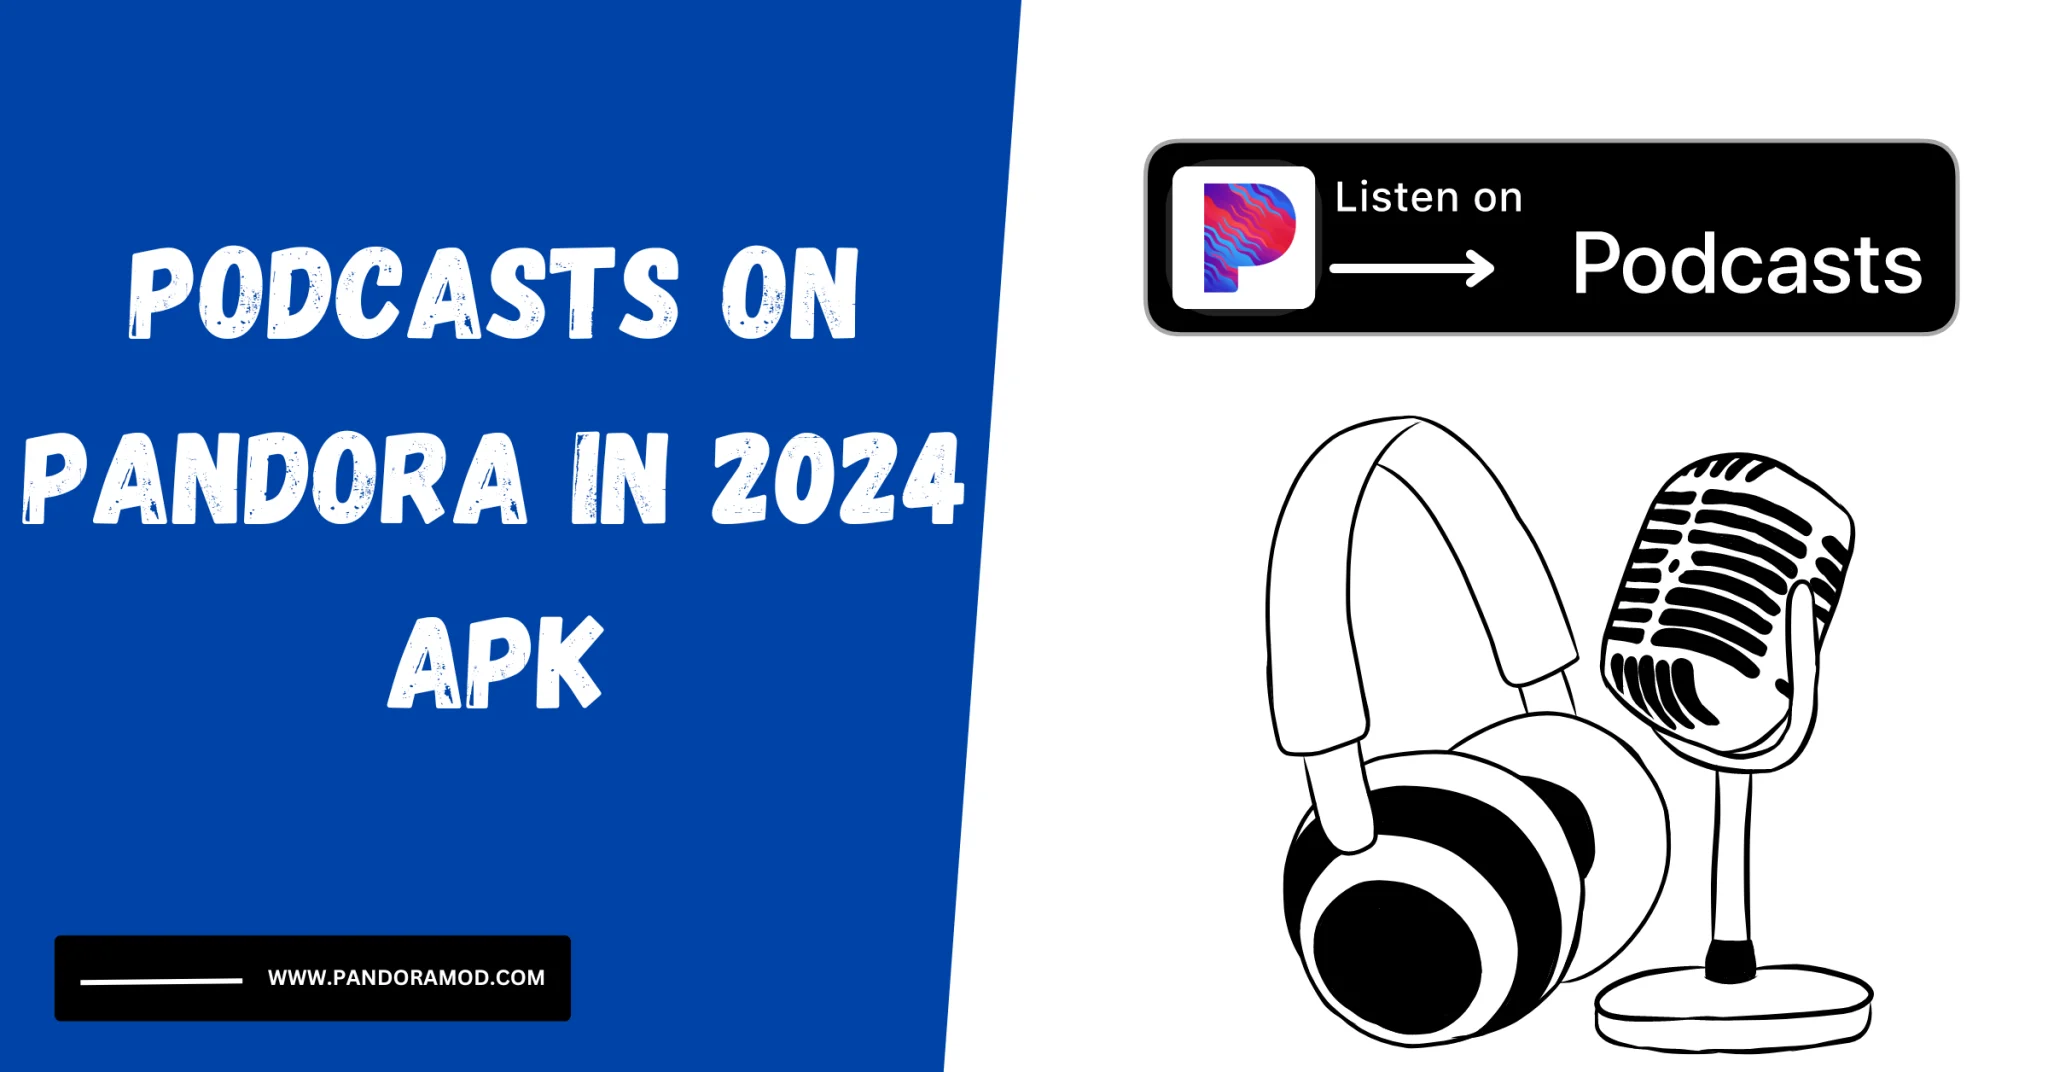 Podcasts on Pandora in 2024 APK